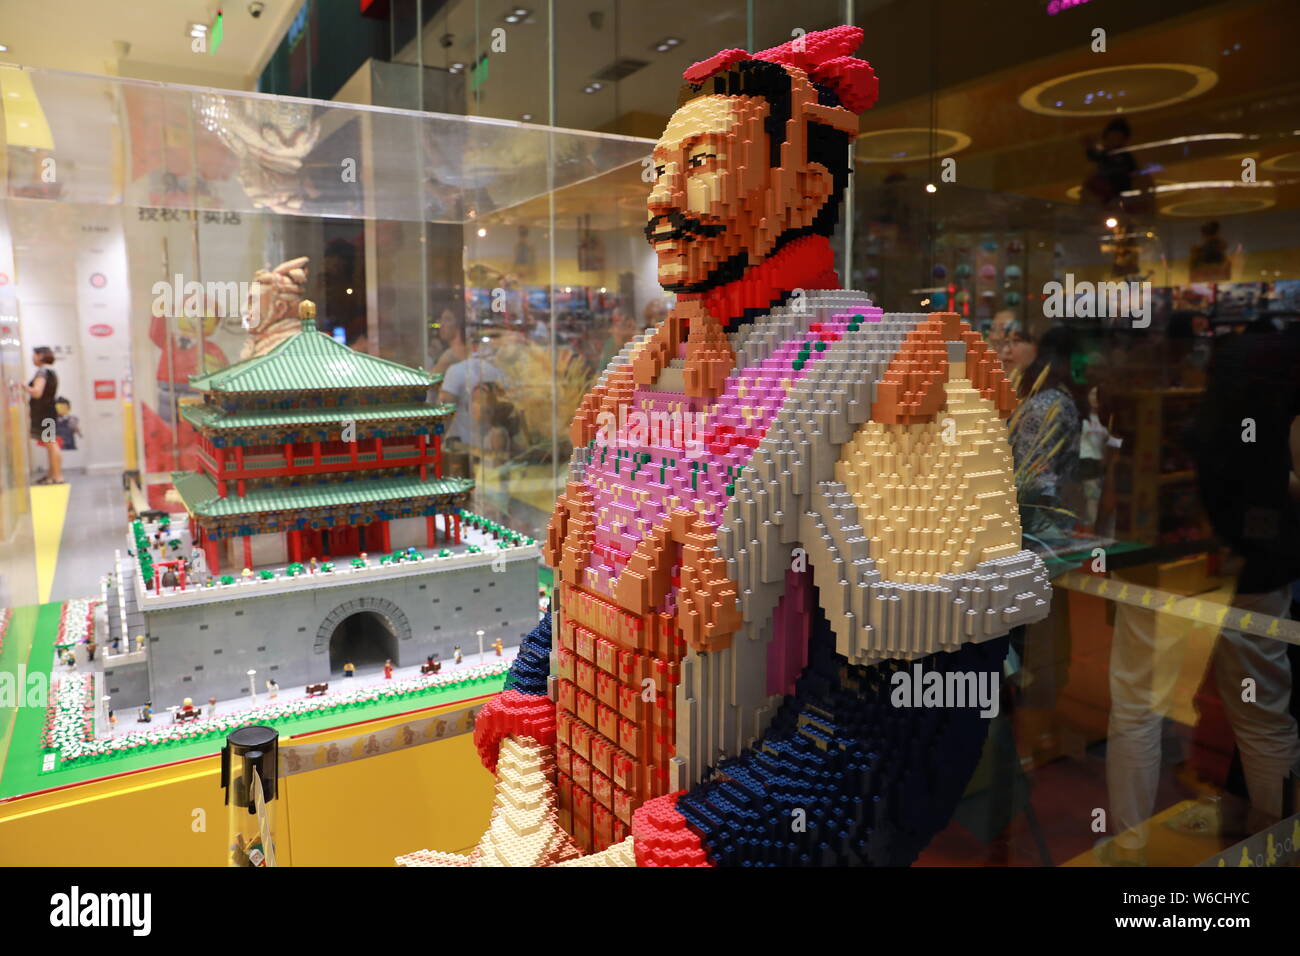 Shaanxi, China. 31 Jul, 2019. The first lego store in northwest China just  opened outside Xi 'an south gate on July 31, 2019.Exquisite lego  restoration of the ancient city of Xi 'an's